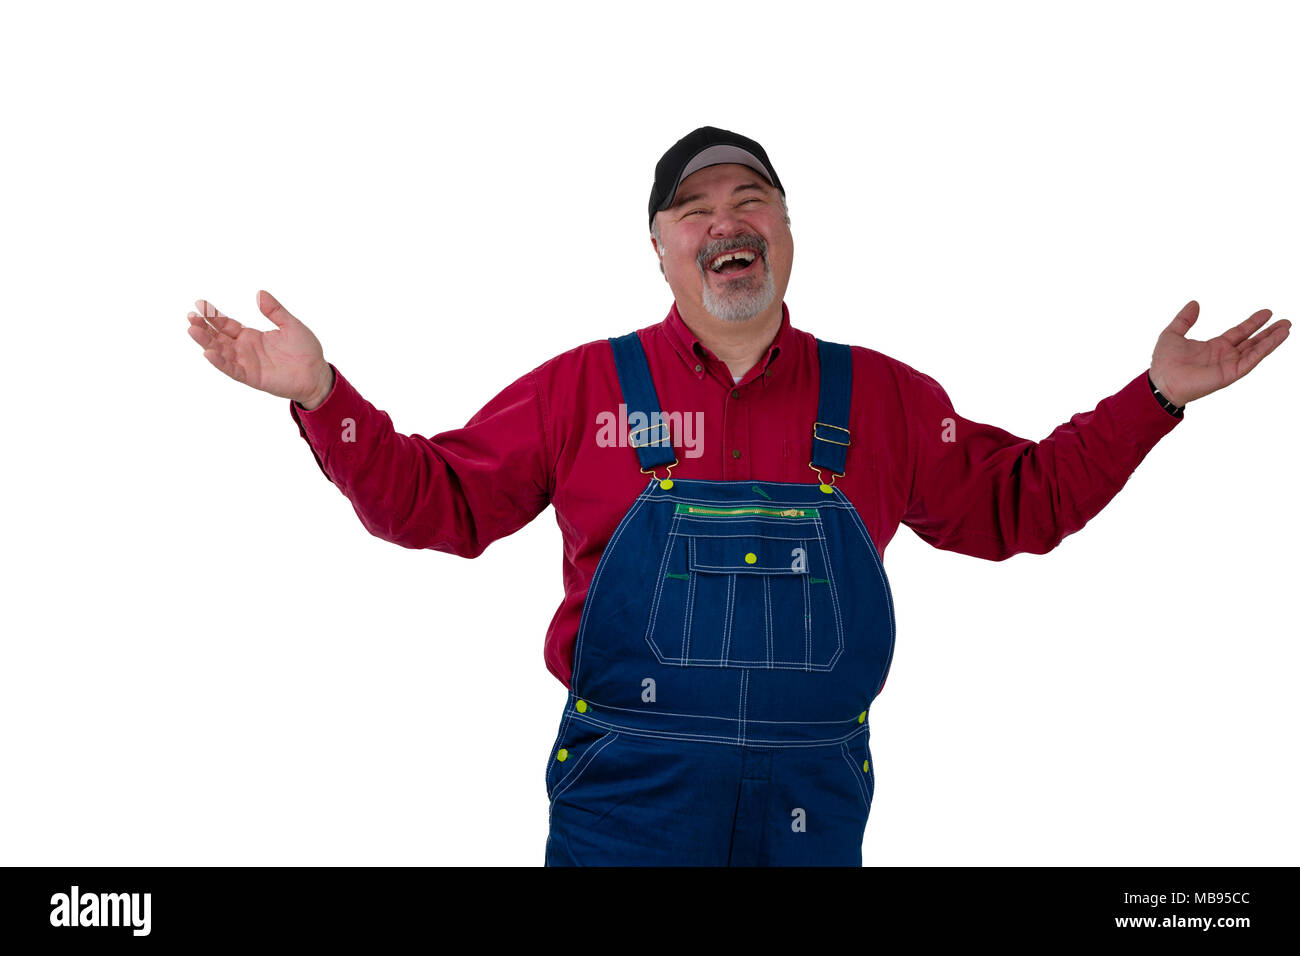 Laughing happy man in denim dungarees and a peaked cap standing raising his arms in a magnanimous gesture isolated on white Stock Photo